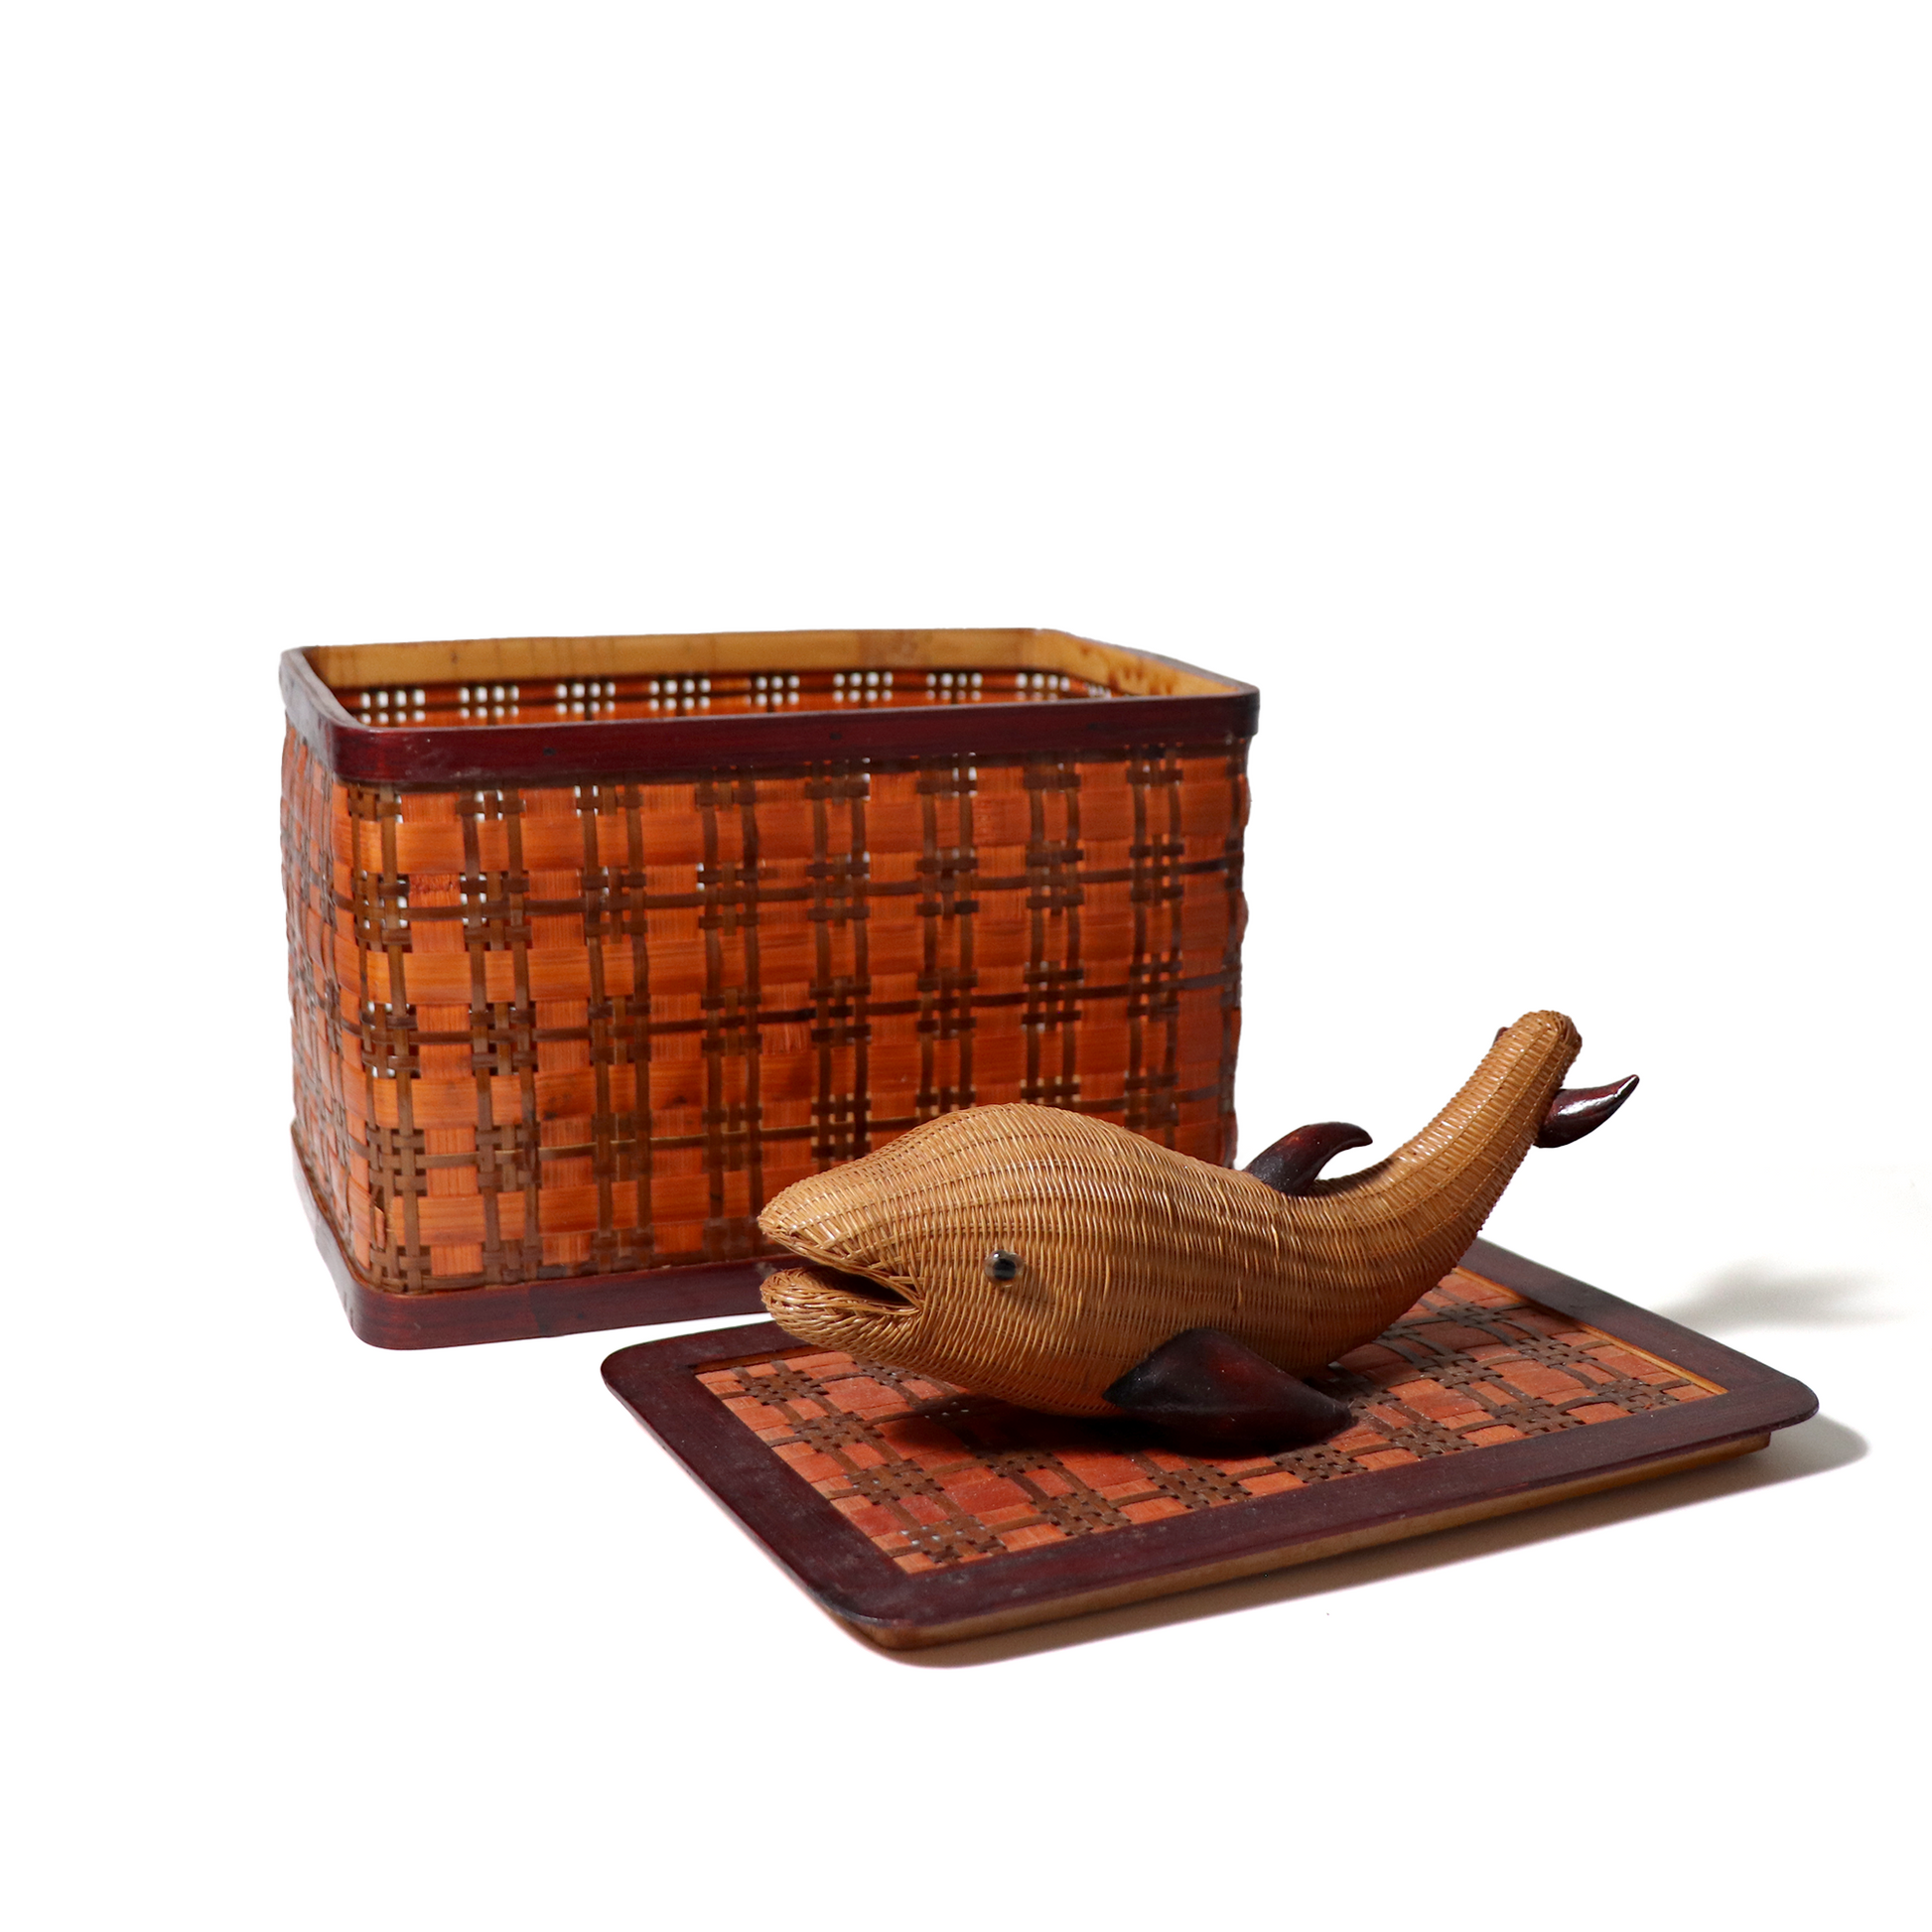 woven wicker dolphin on the lid of the box